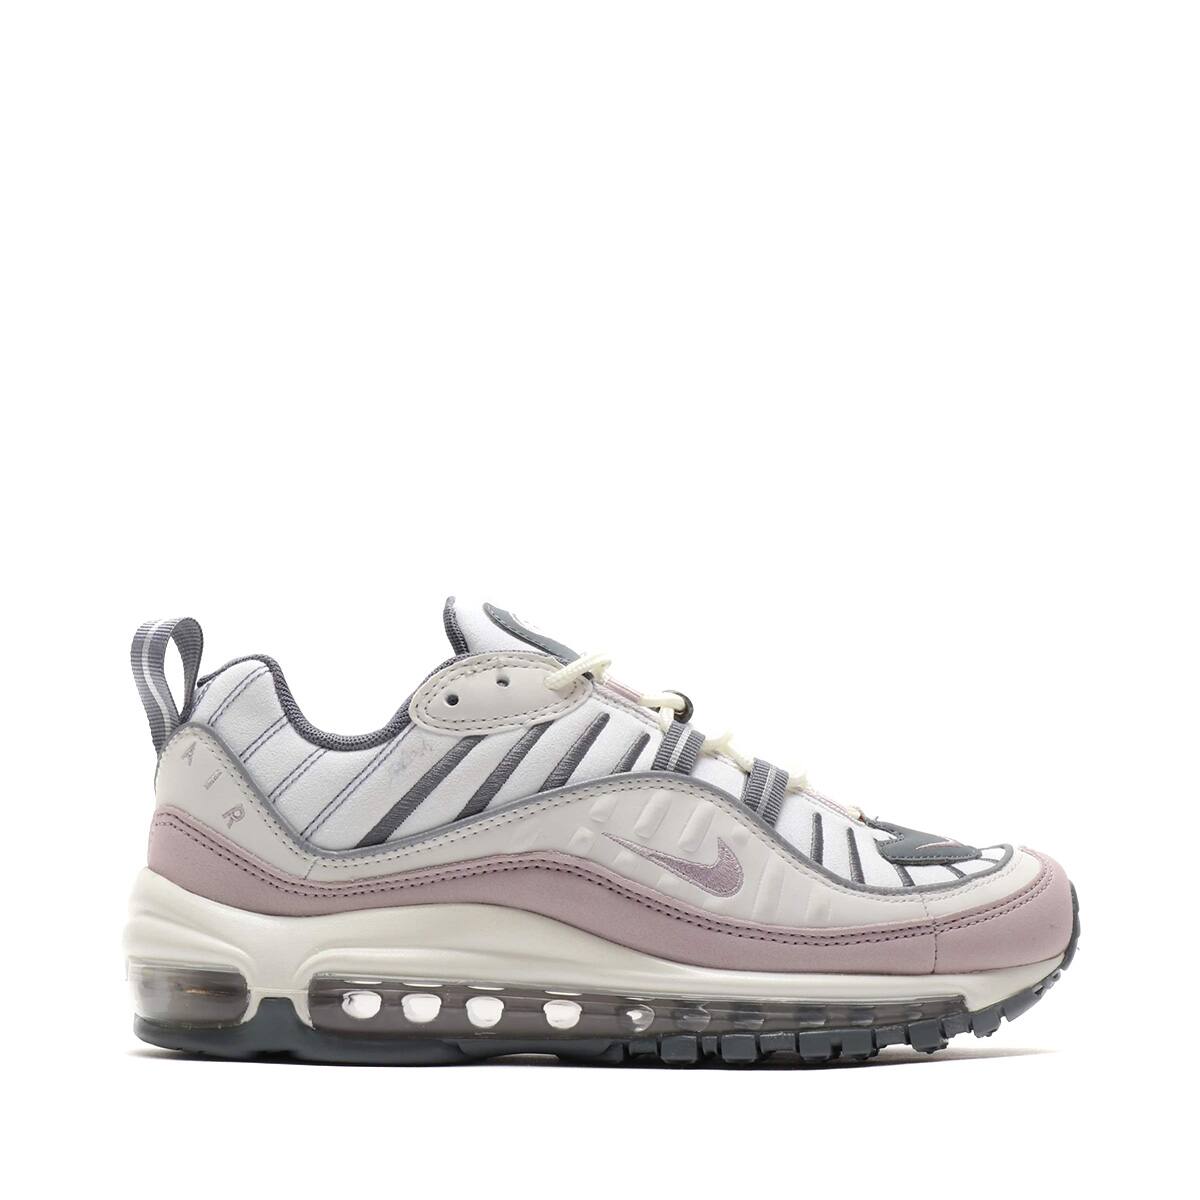 NIKE W AIR MAX 98 SMMT WHT/VLT ASH-CL GRY-RFLCT 19SU-I